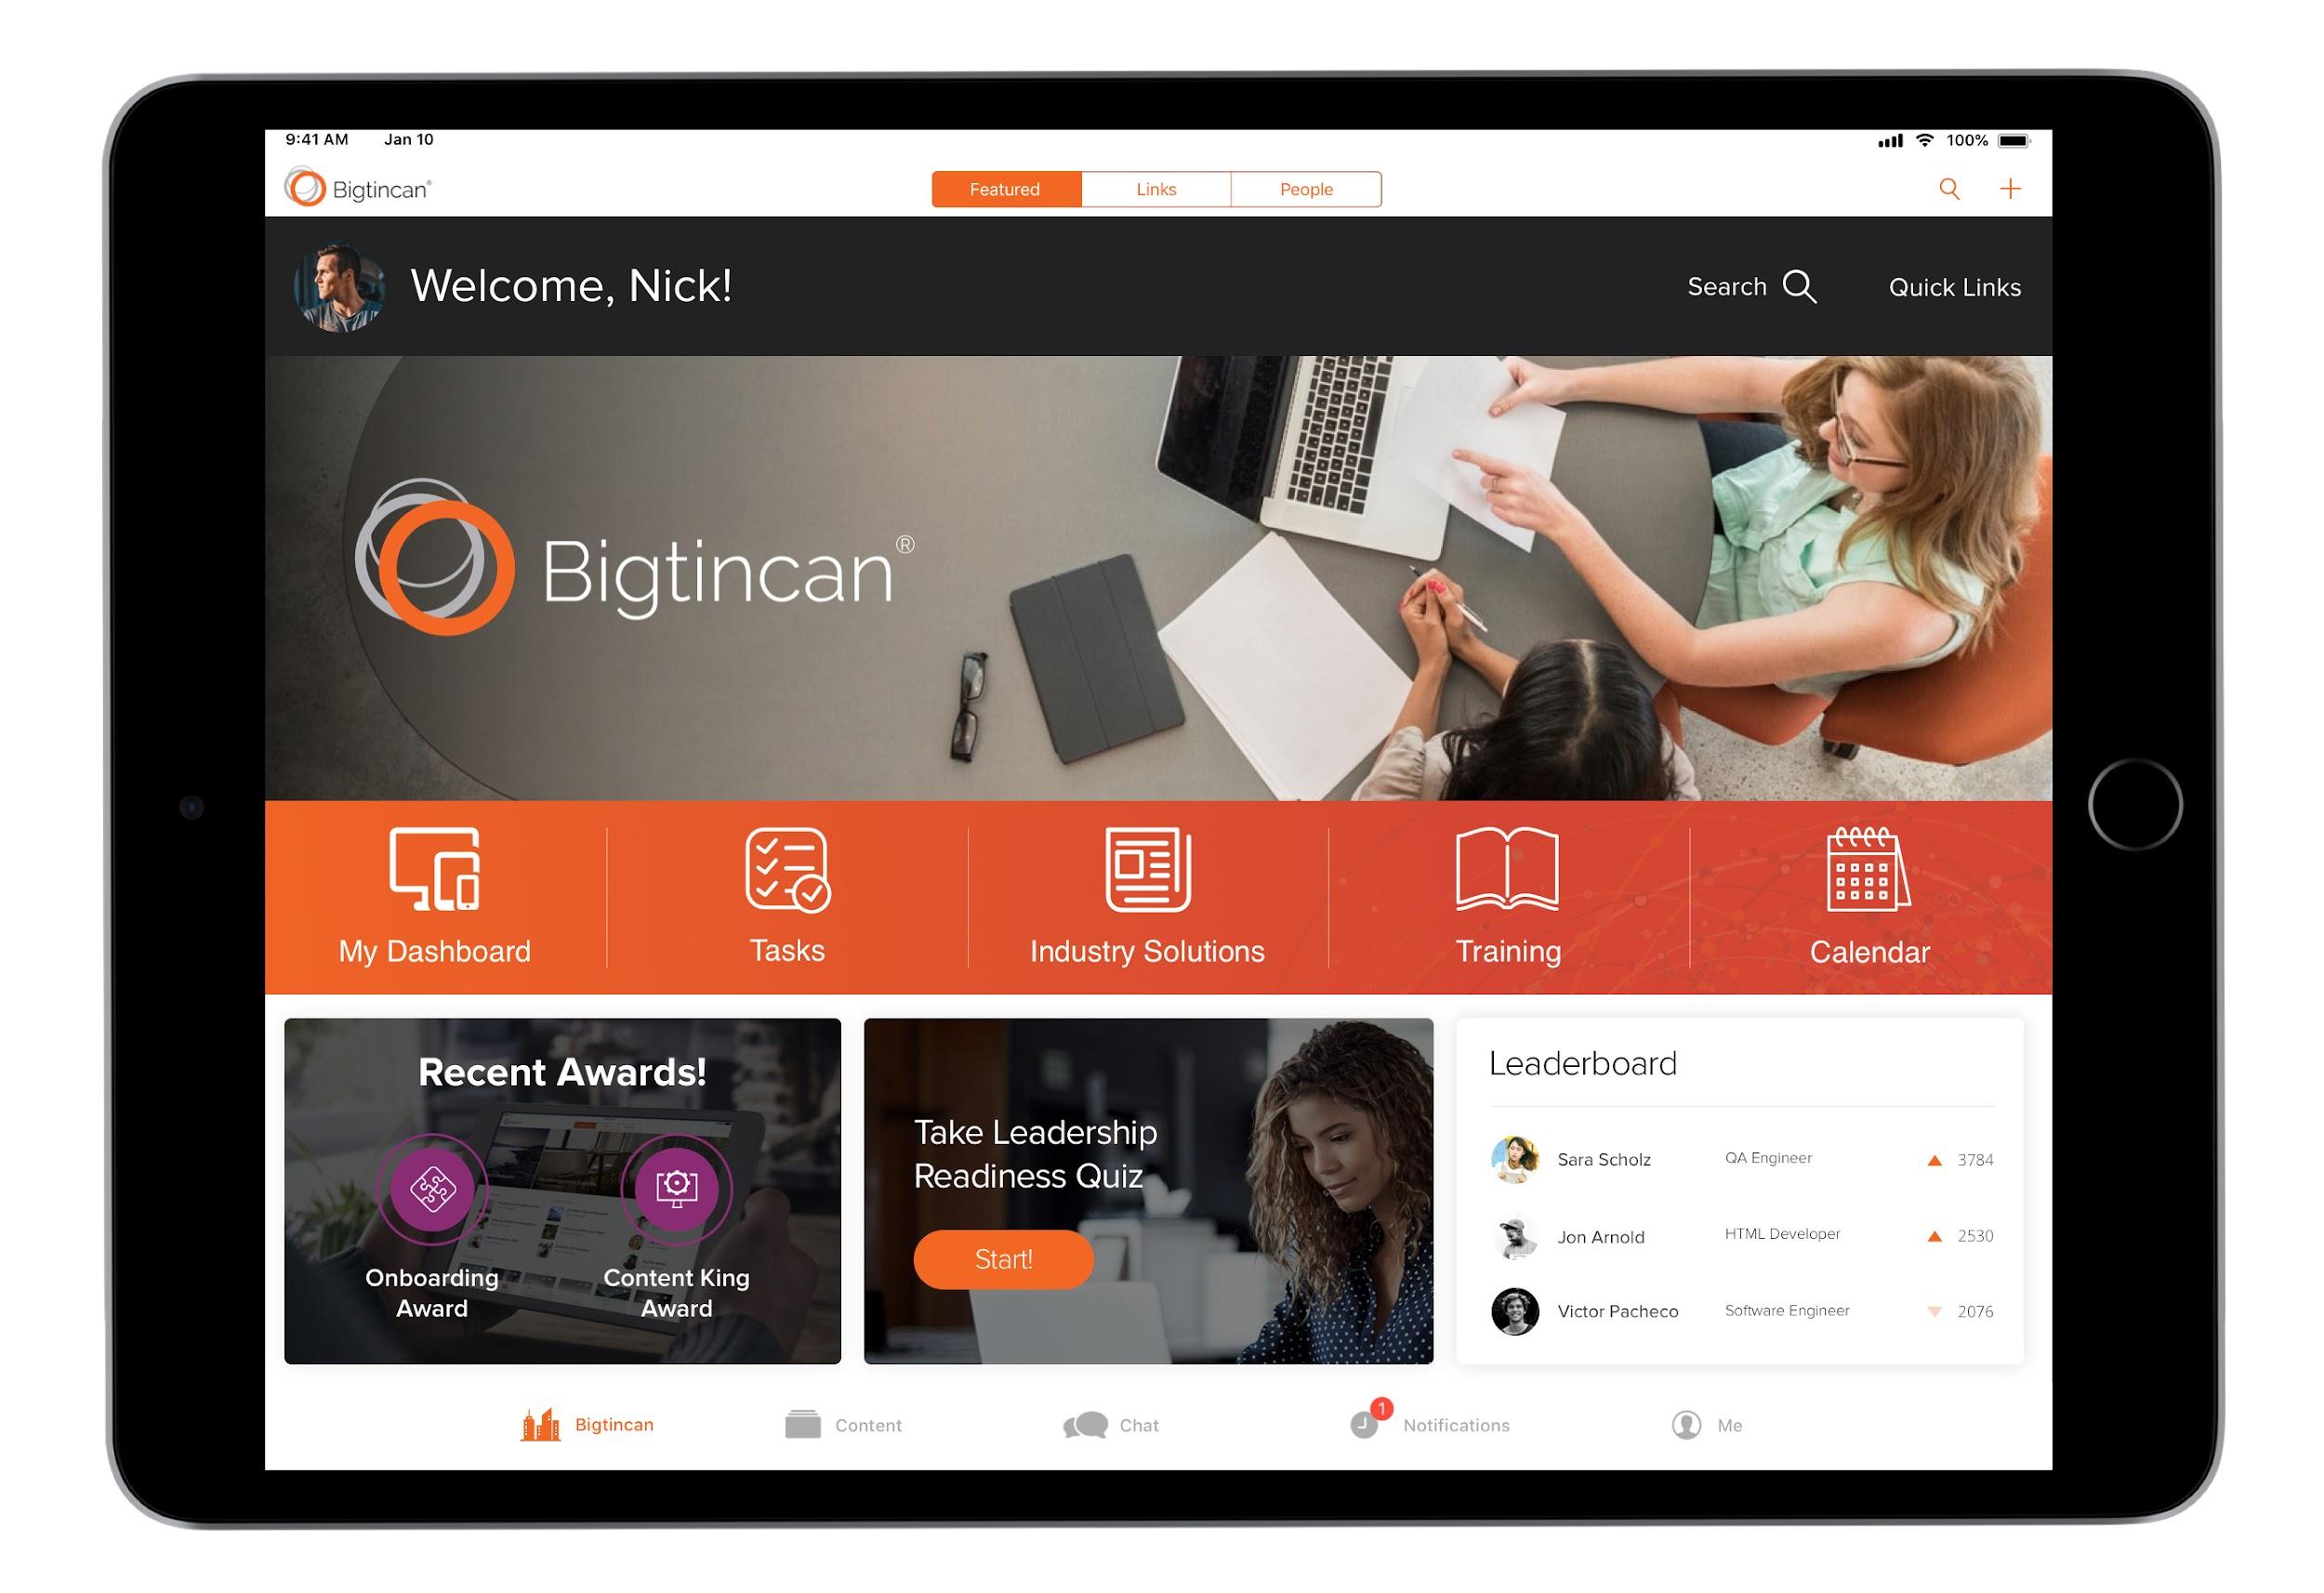 An example of how you can customize the Bigtincan platform for your own branding and work style.